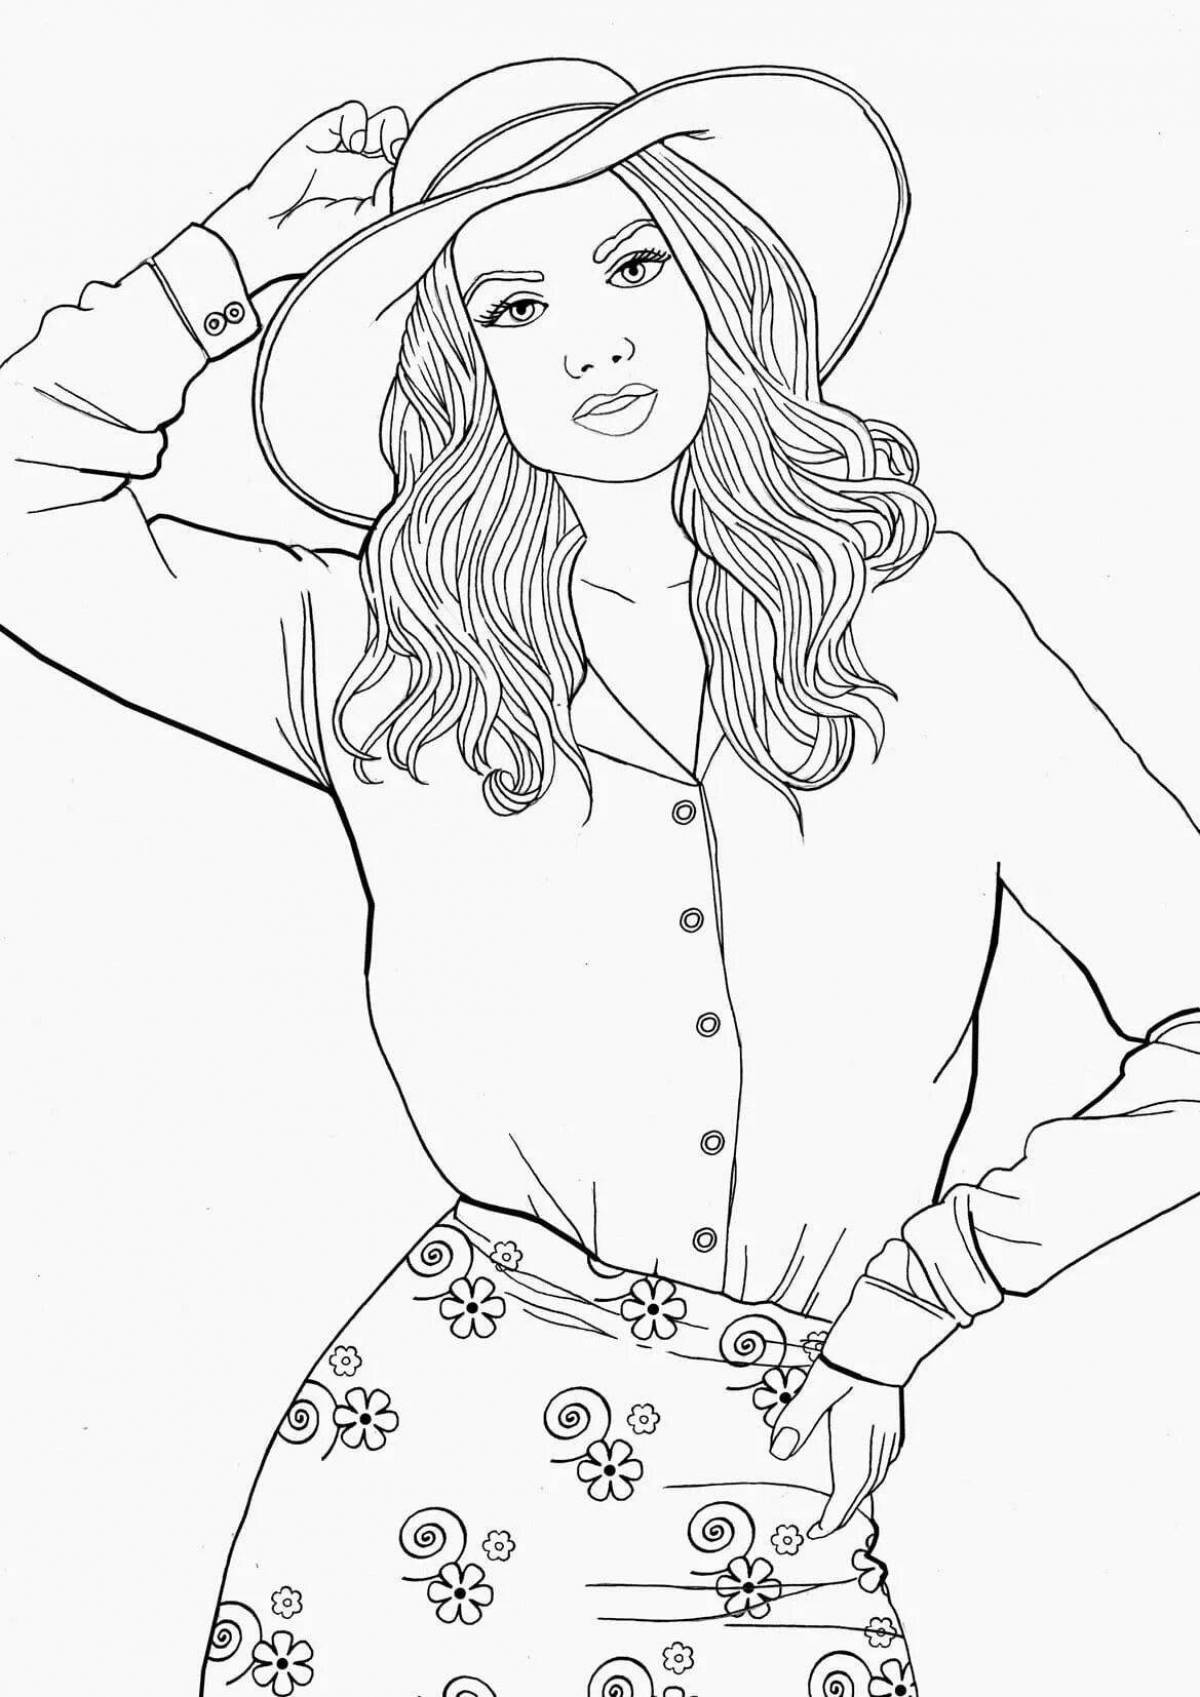 Cheerful coloring book for women